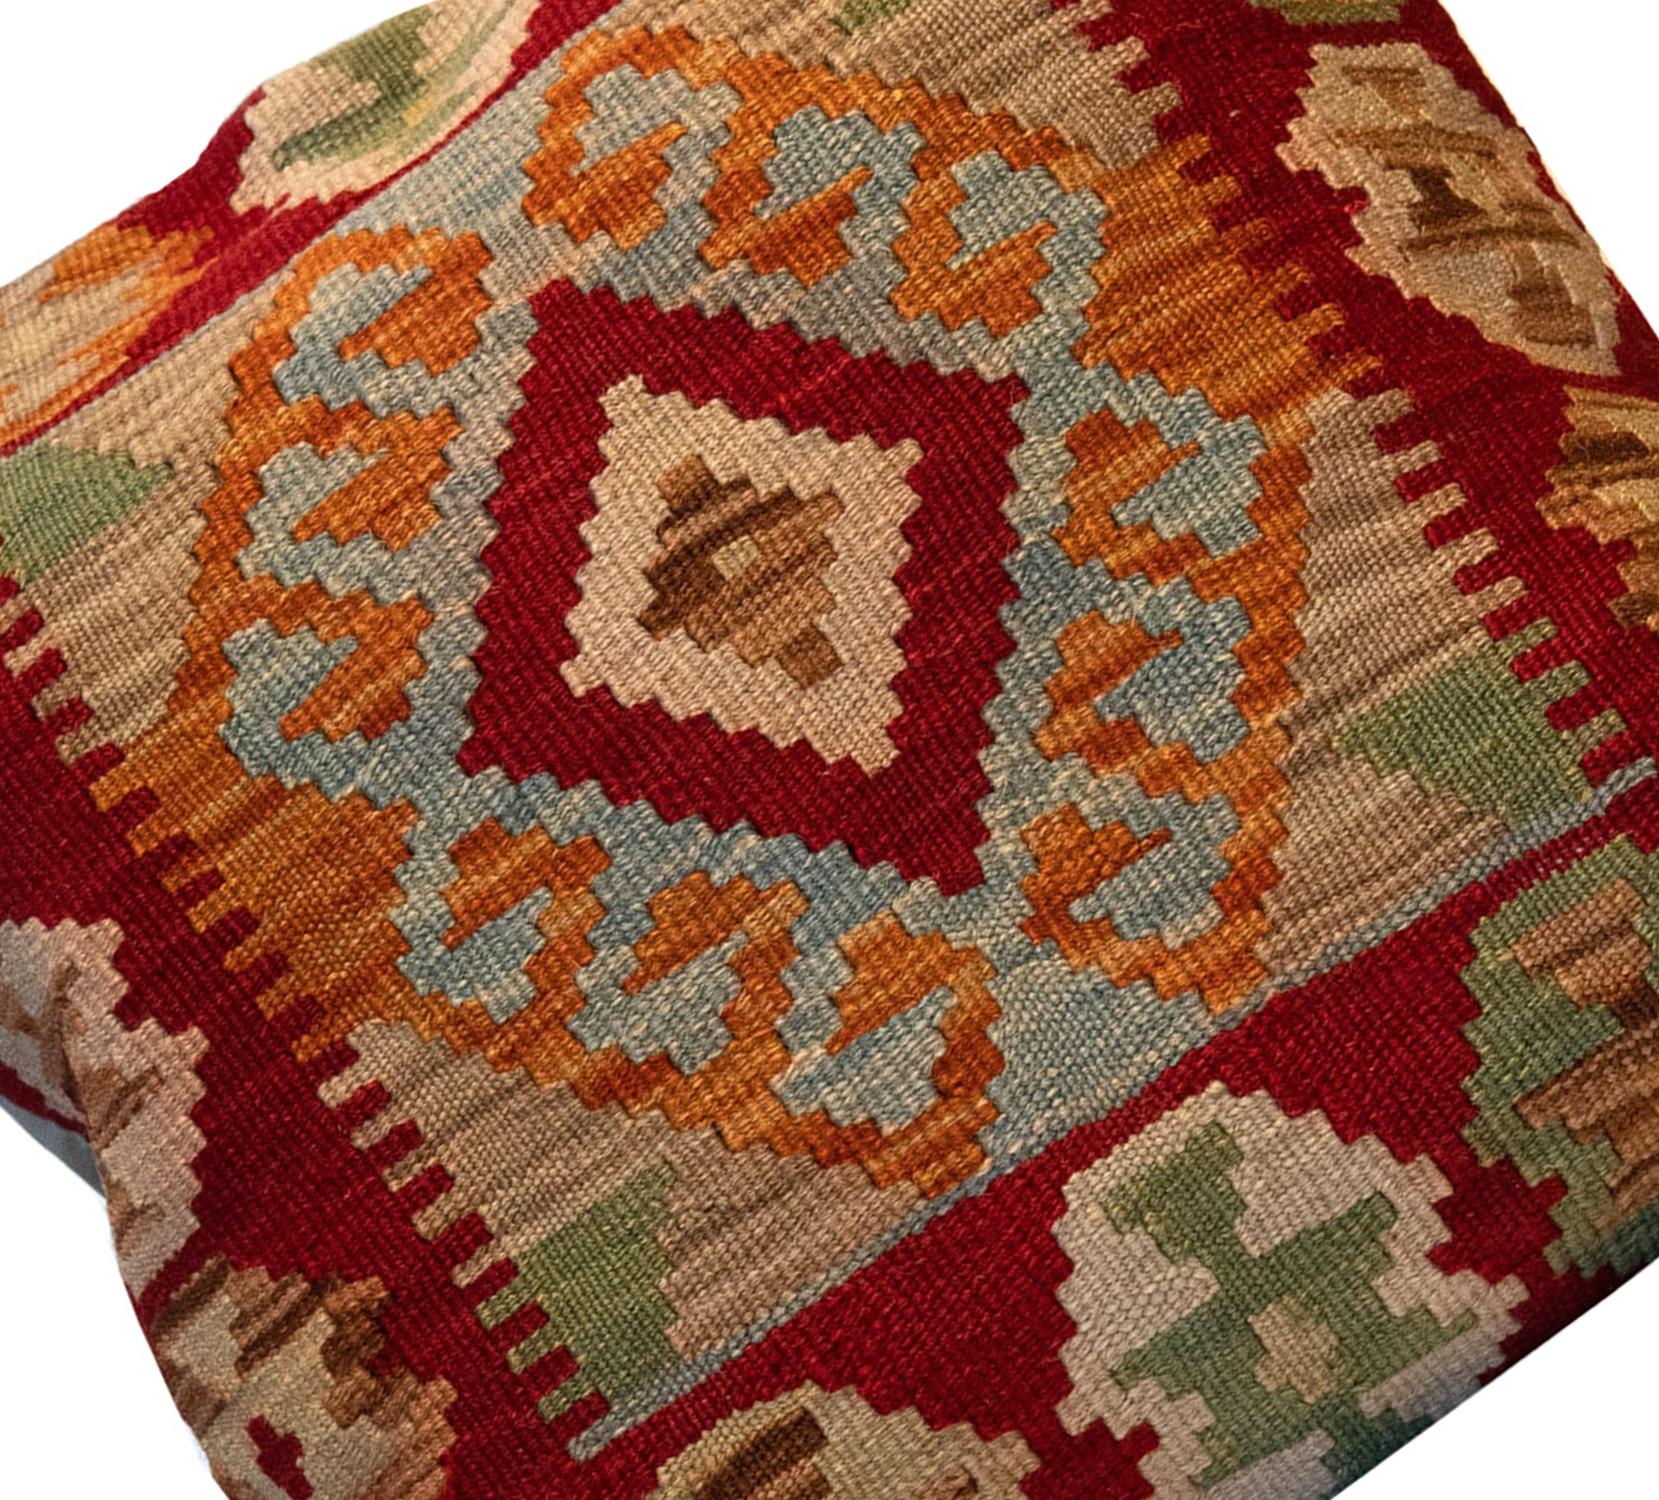 Vegetable Dyed Red Beige Wool Geometric Kilim Cushion Cover Handmade Oriental Scatter Pillow